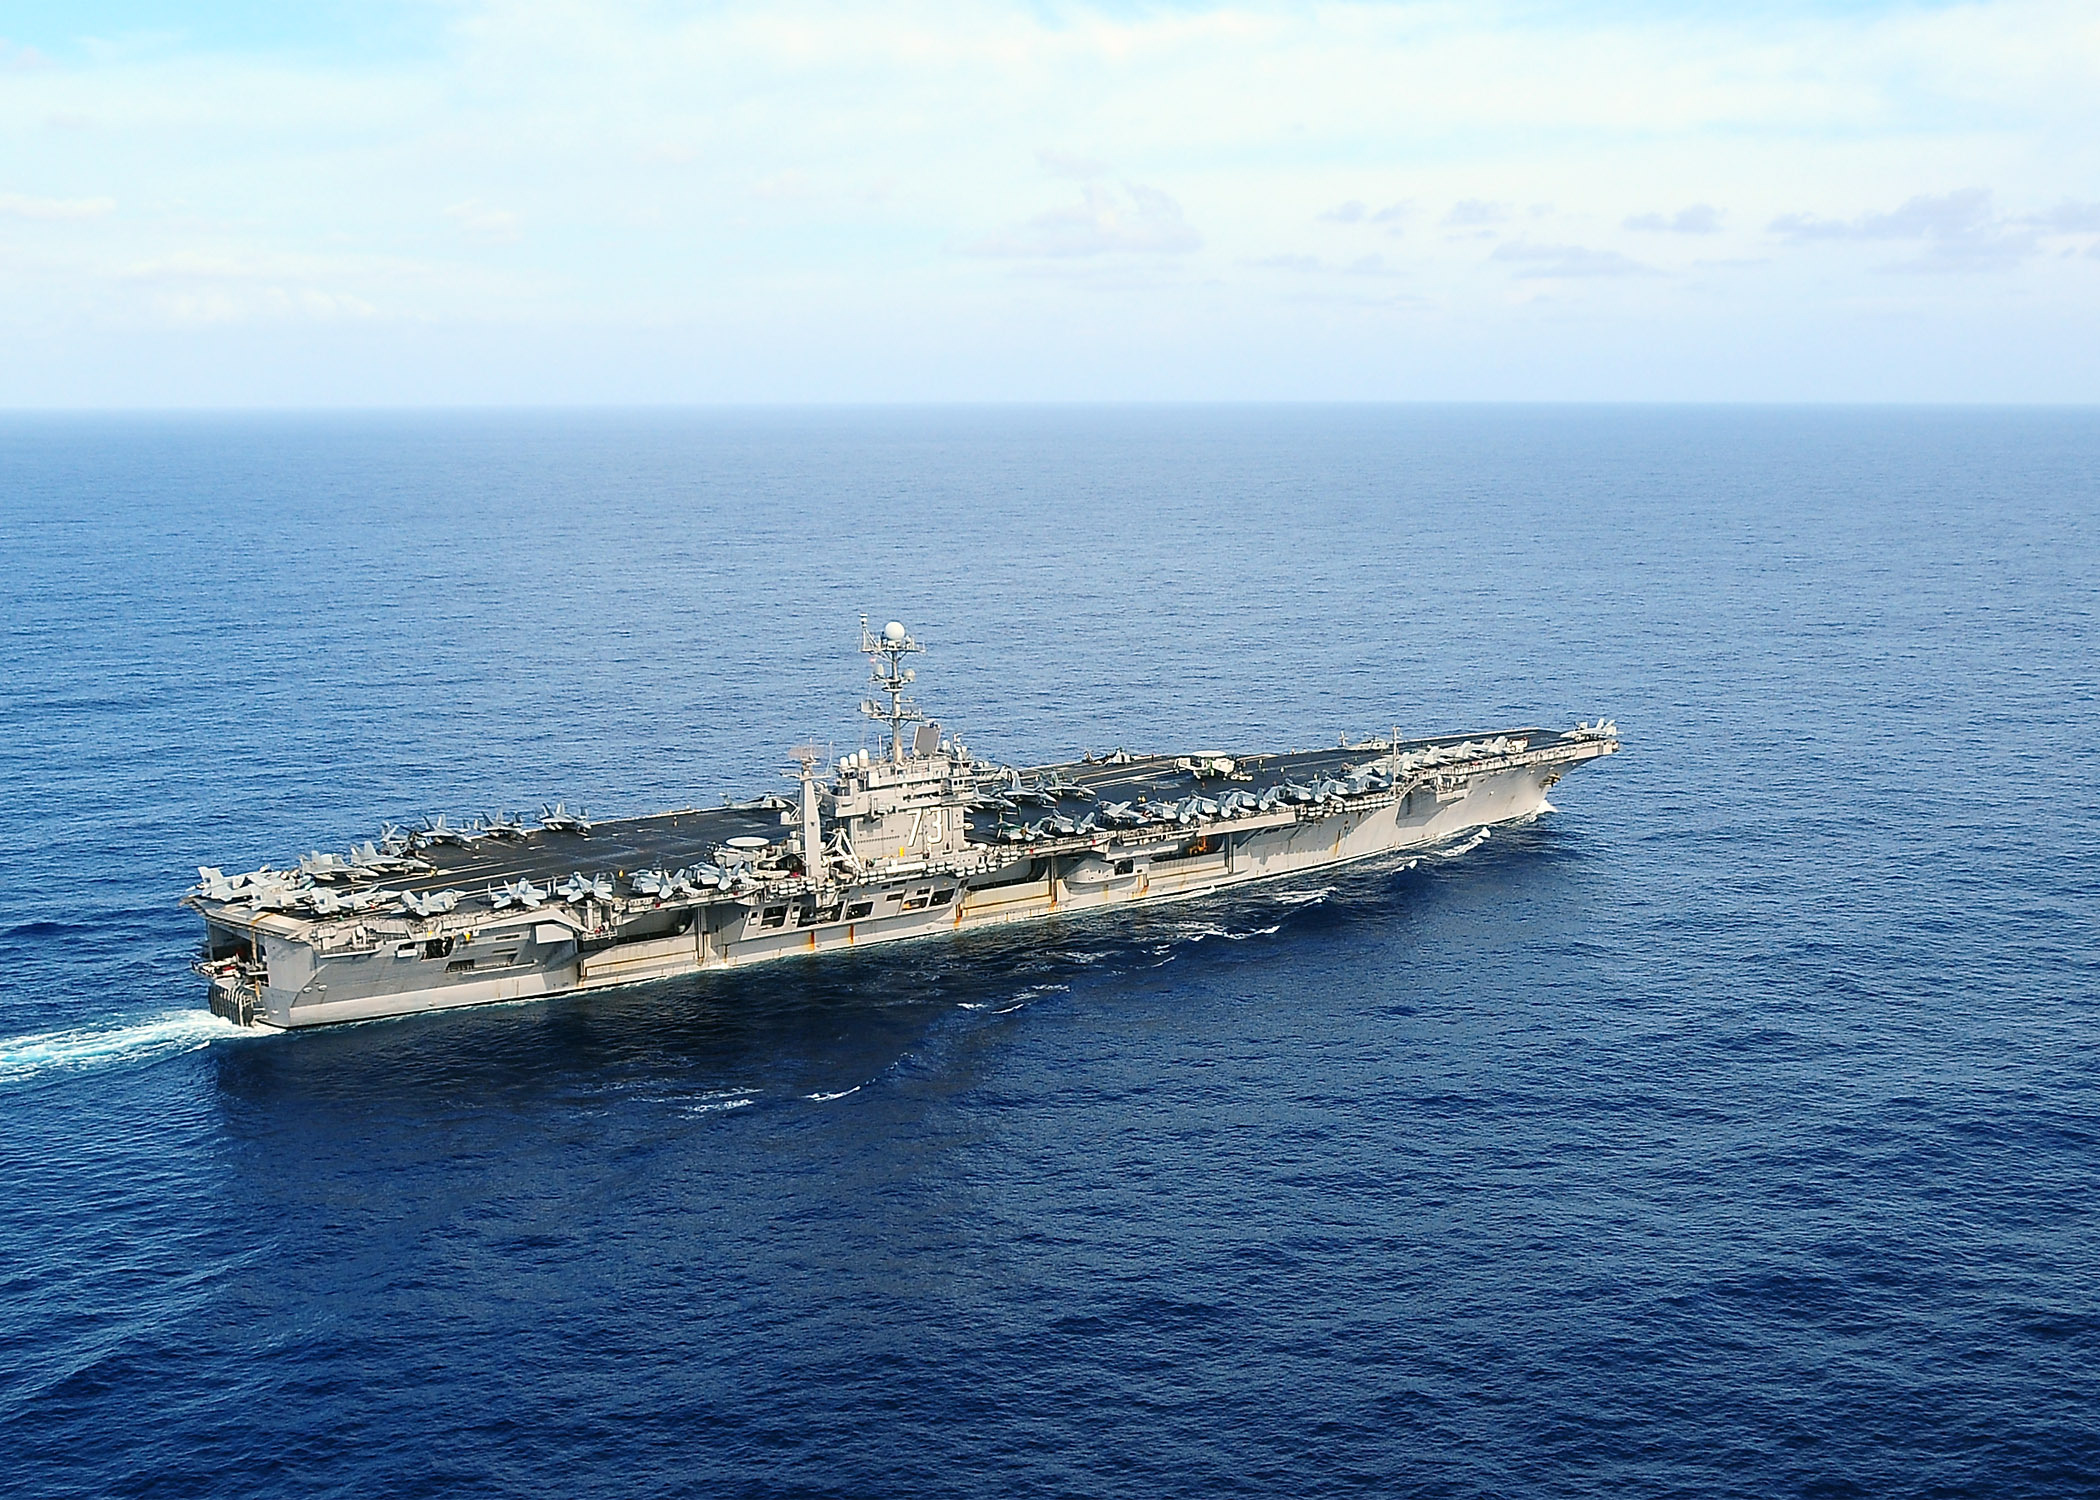 The aircraft carrier USS George Washington (CVN 73) transits the Pacific Ocean. George Washington, the Navy's only permanently forward deployed aircraft carrier, is participating in Annual Exercise, a yearly bilateral exercise with the U.S. Navy and the Japan Maritime Self-Defense Force.